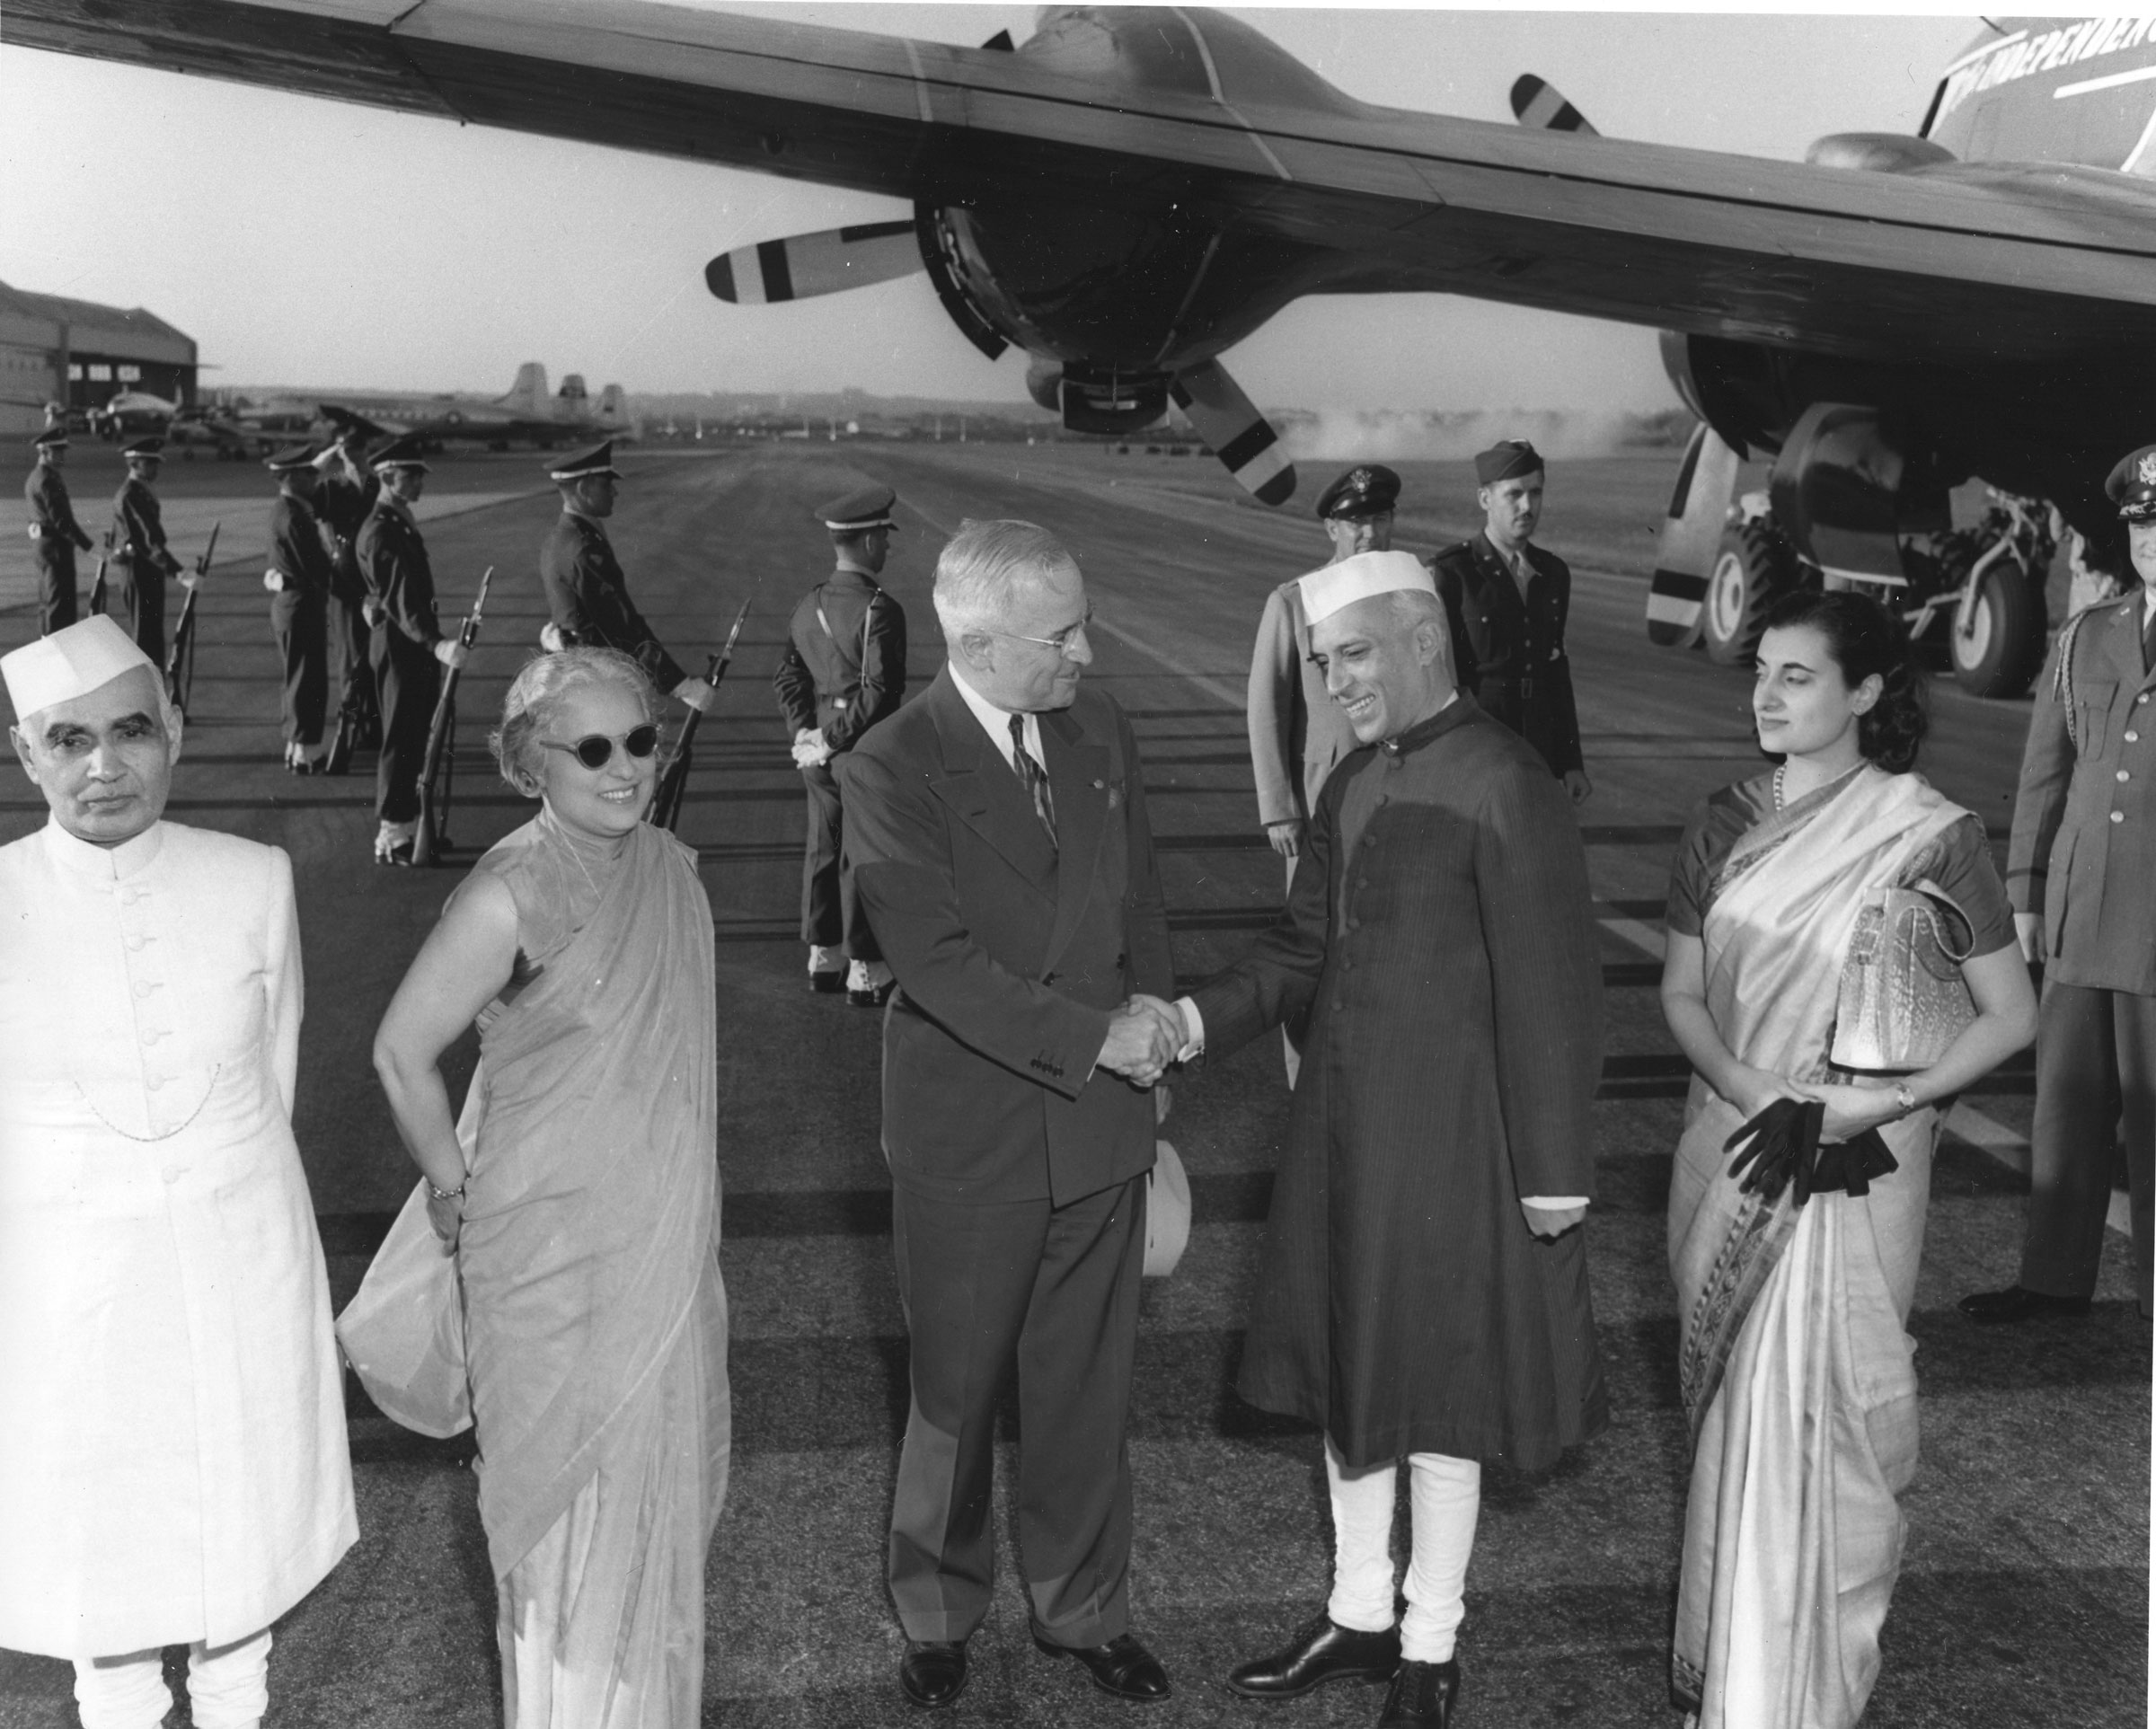 American President Harry S. Truman shakes hands with Indian Prime Minister Jawaharlal Nehru on the tarmac